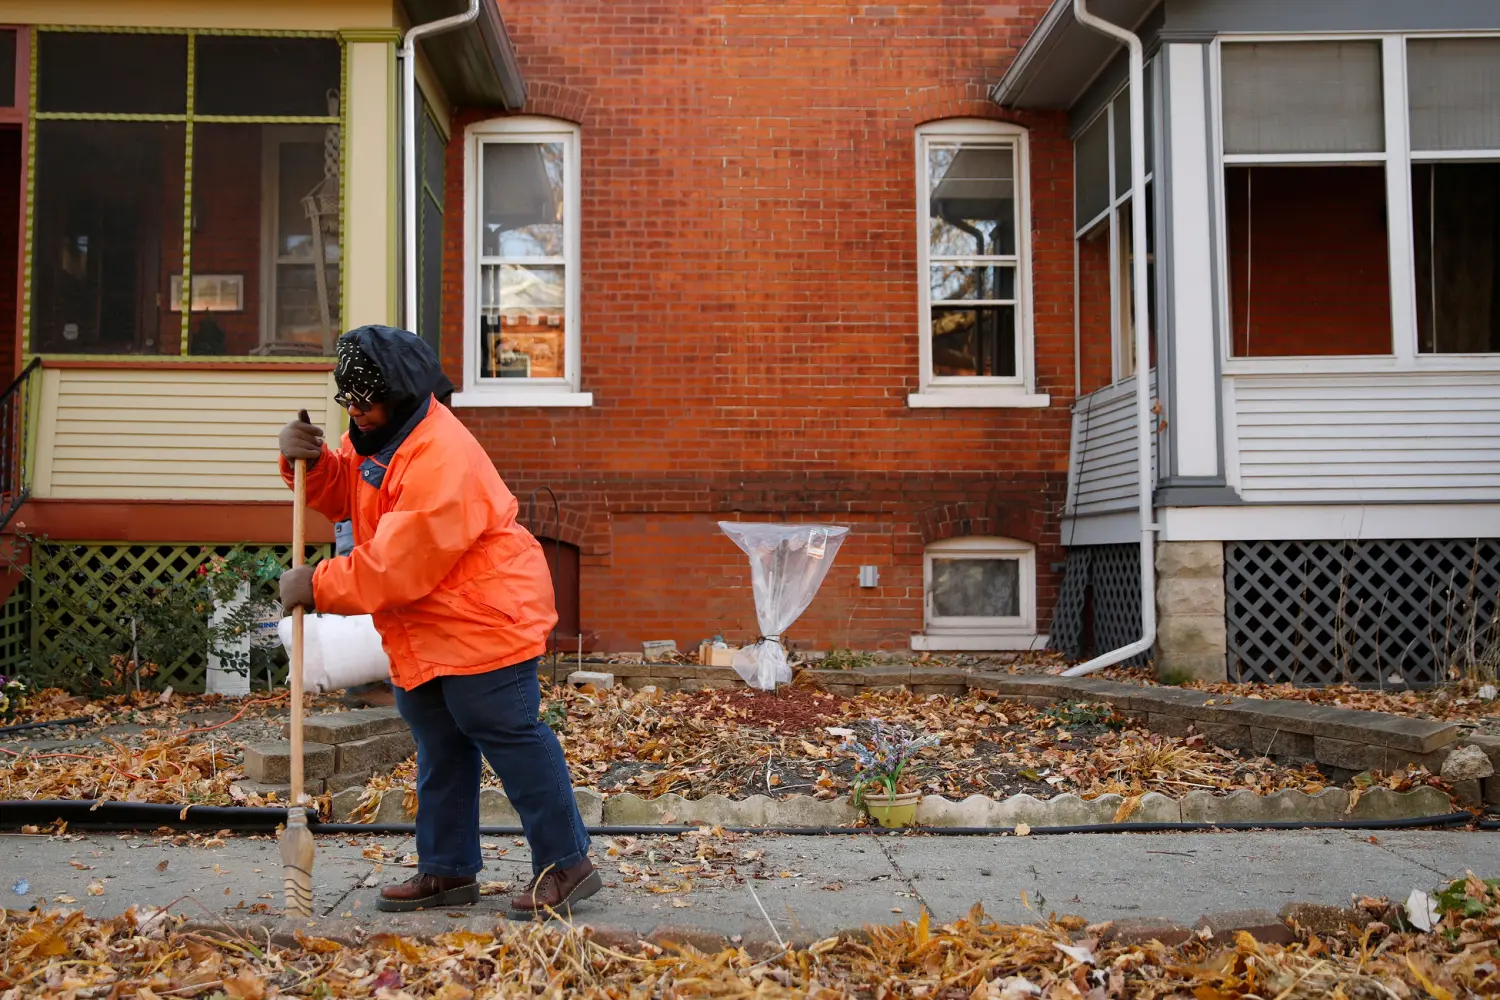 Ardana McFerren sweeps leafs outside of her home in the historic Pullman neighborhood in Chicago November 20, 2014. U.S. President Barack Obama is expected to announce the designation of the Pullman neighborhood as a national park on February 19, according to park advocates. The neighborhood's brick homes and ornate public buildings were built in the 1800s by industrialist George Pullman as a blue-collar utopia to house workers from his sleeper car factory. Picture taken November 20, 2014.  REUTERS/Andrew Nelles (UNITED STATES - Tags: SOCIETY ENVIRONMENT POLITICS) - TM3EABN1EN701